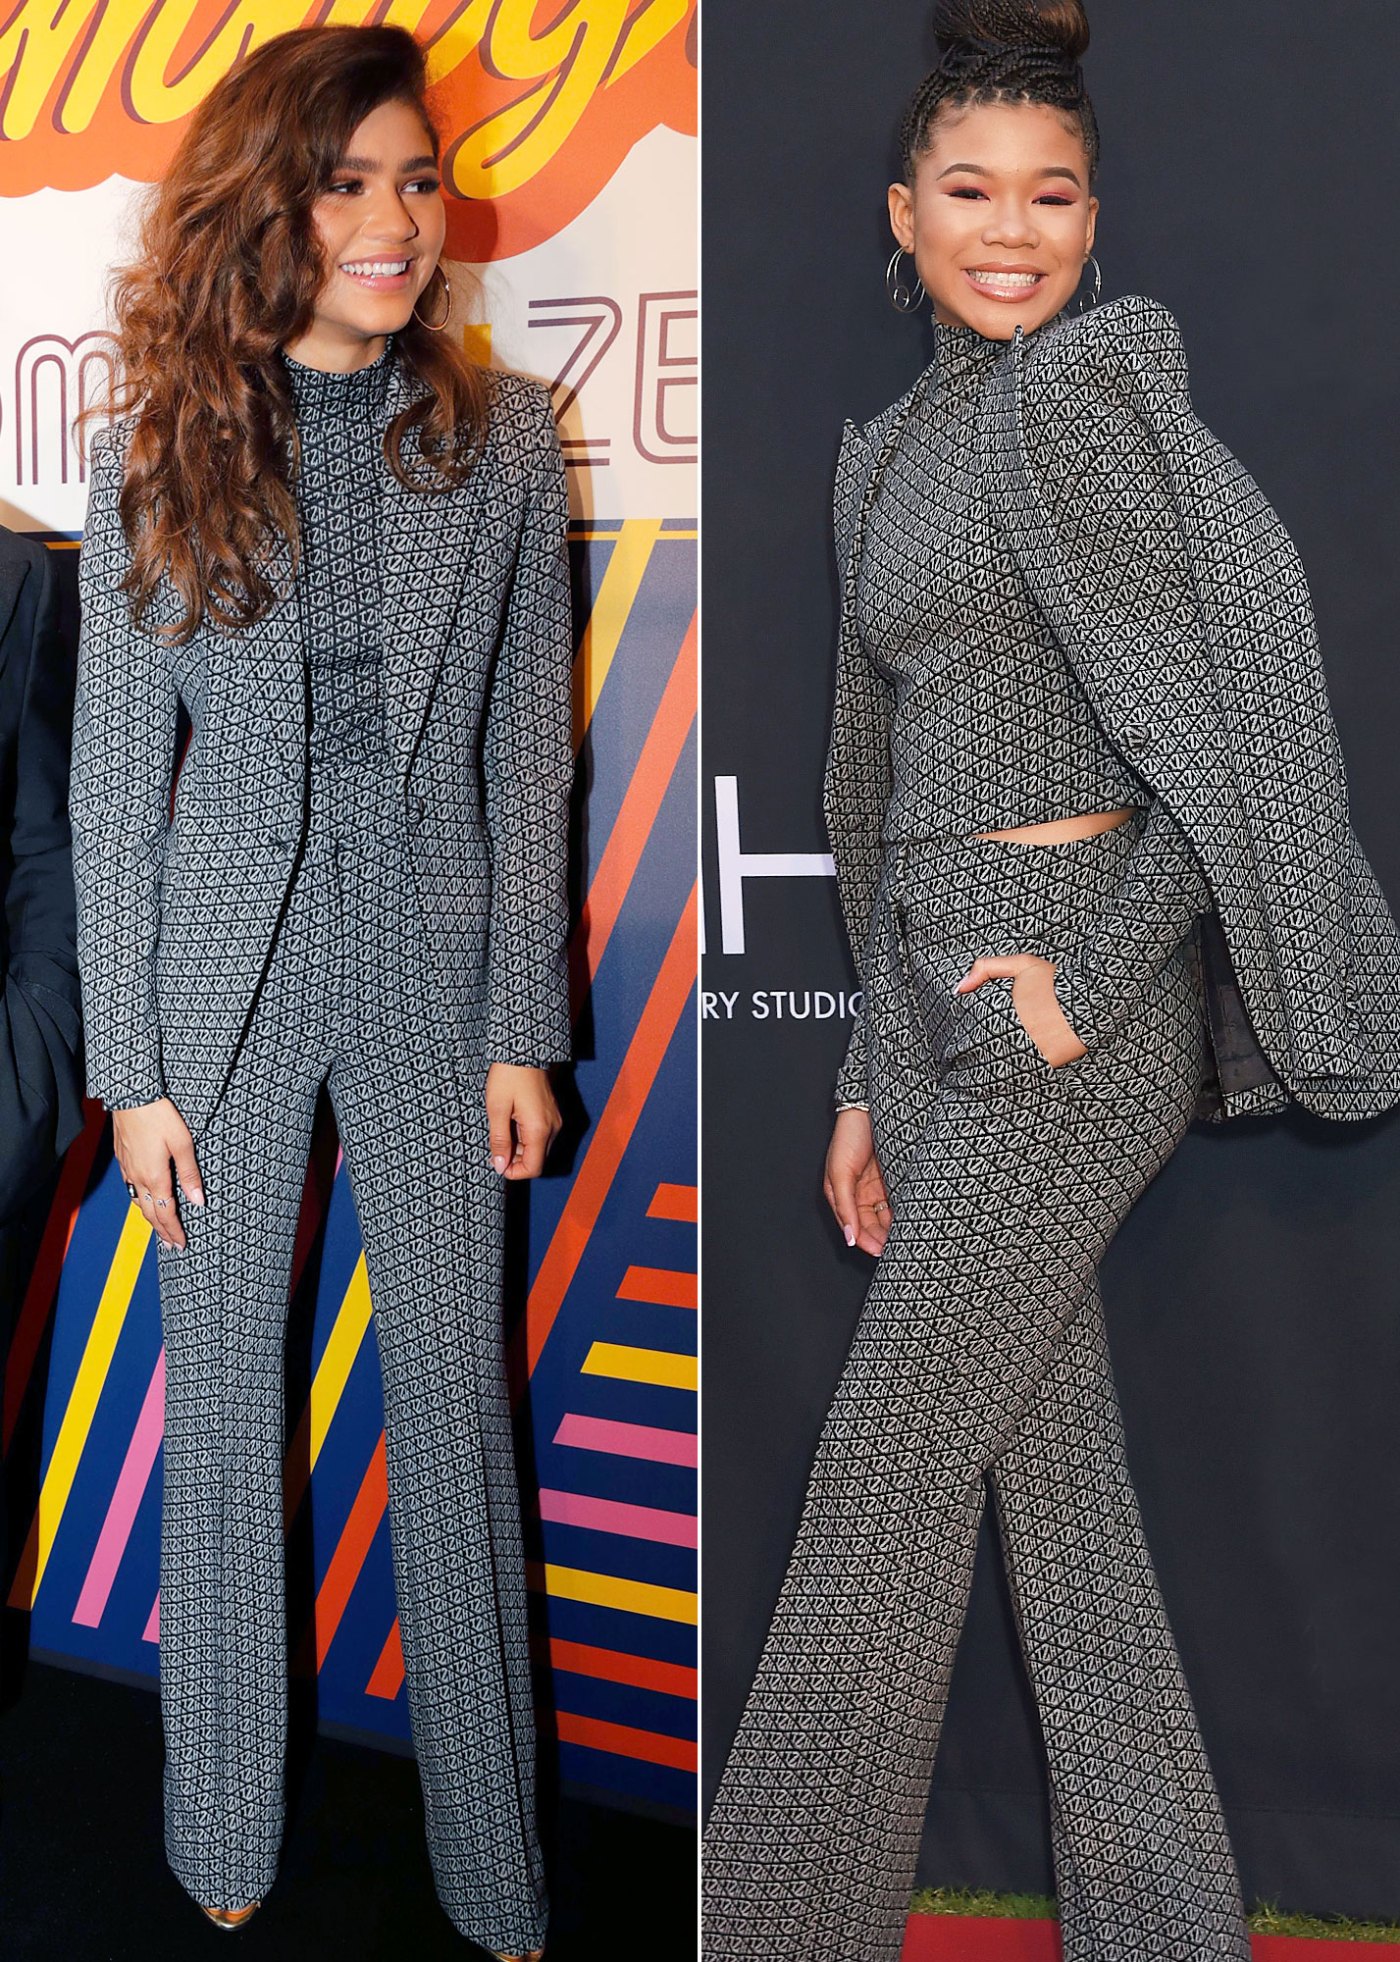 Celebrities Wearing Same Fashion Styles: Who Wore It Best?